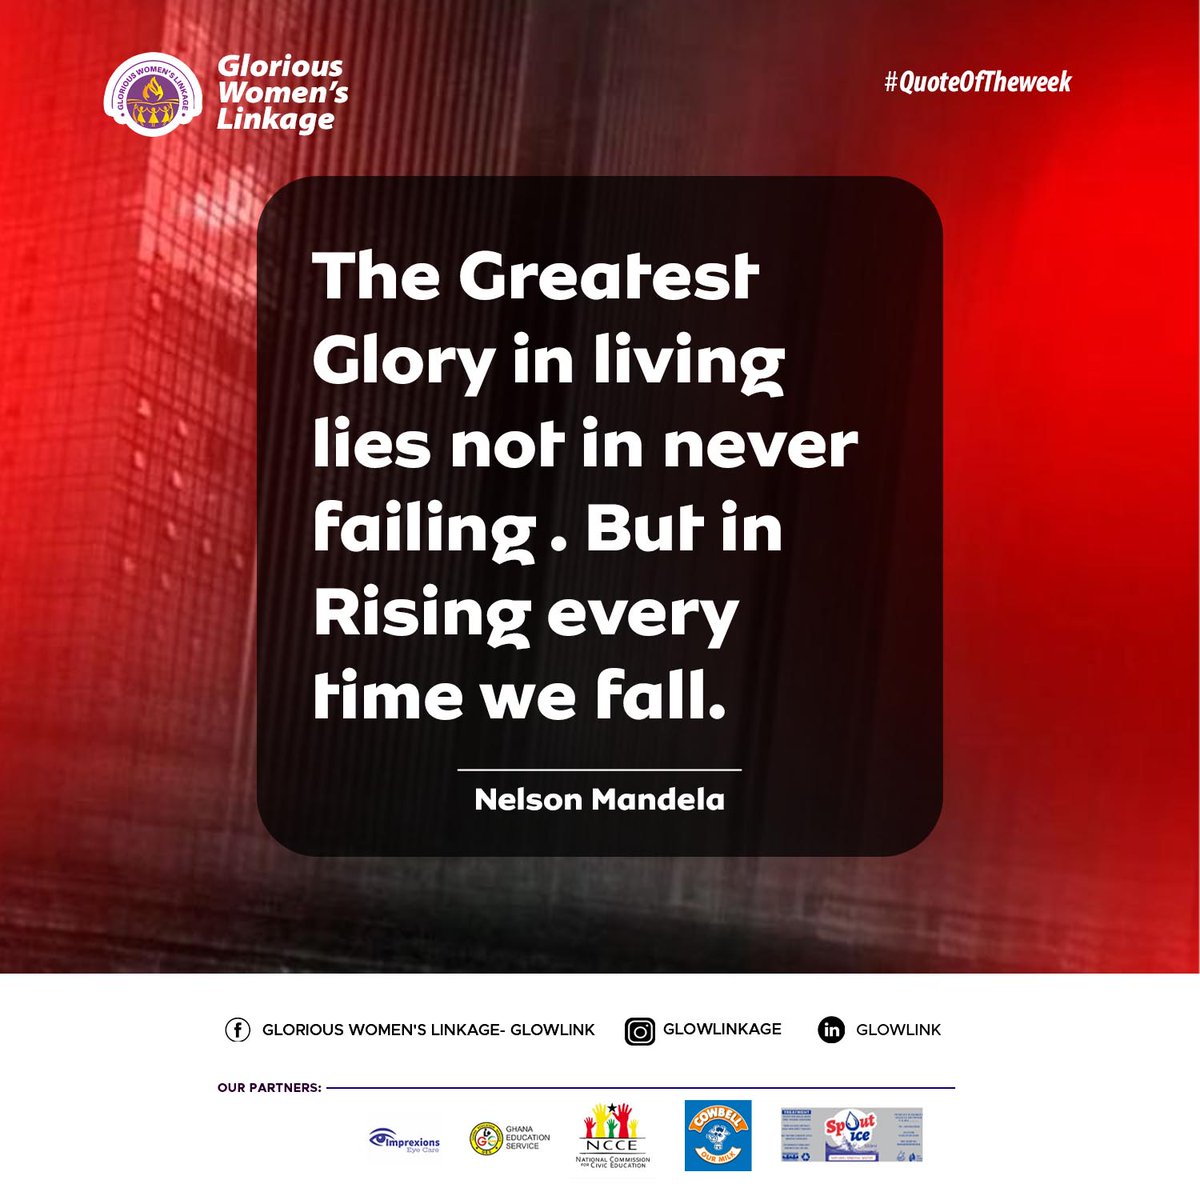 'The Greatest Glory in living lies not in never failing. But in Rising every time we fall.'
Nelson Mandela
#GLOWLINK #quoteoftheweek #risefromfalls #EmbraceResilience #NeverGiveIn #TriumphOverFailure #KeepRising